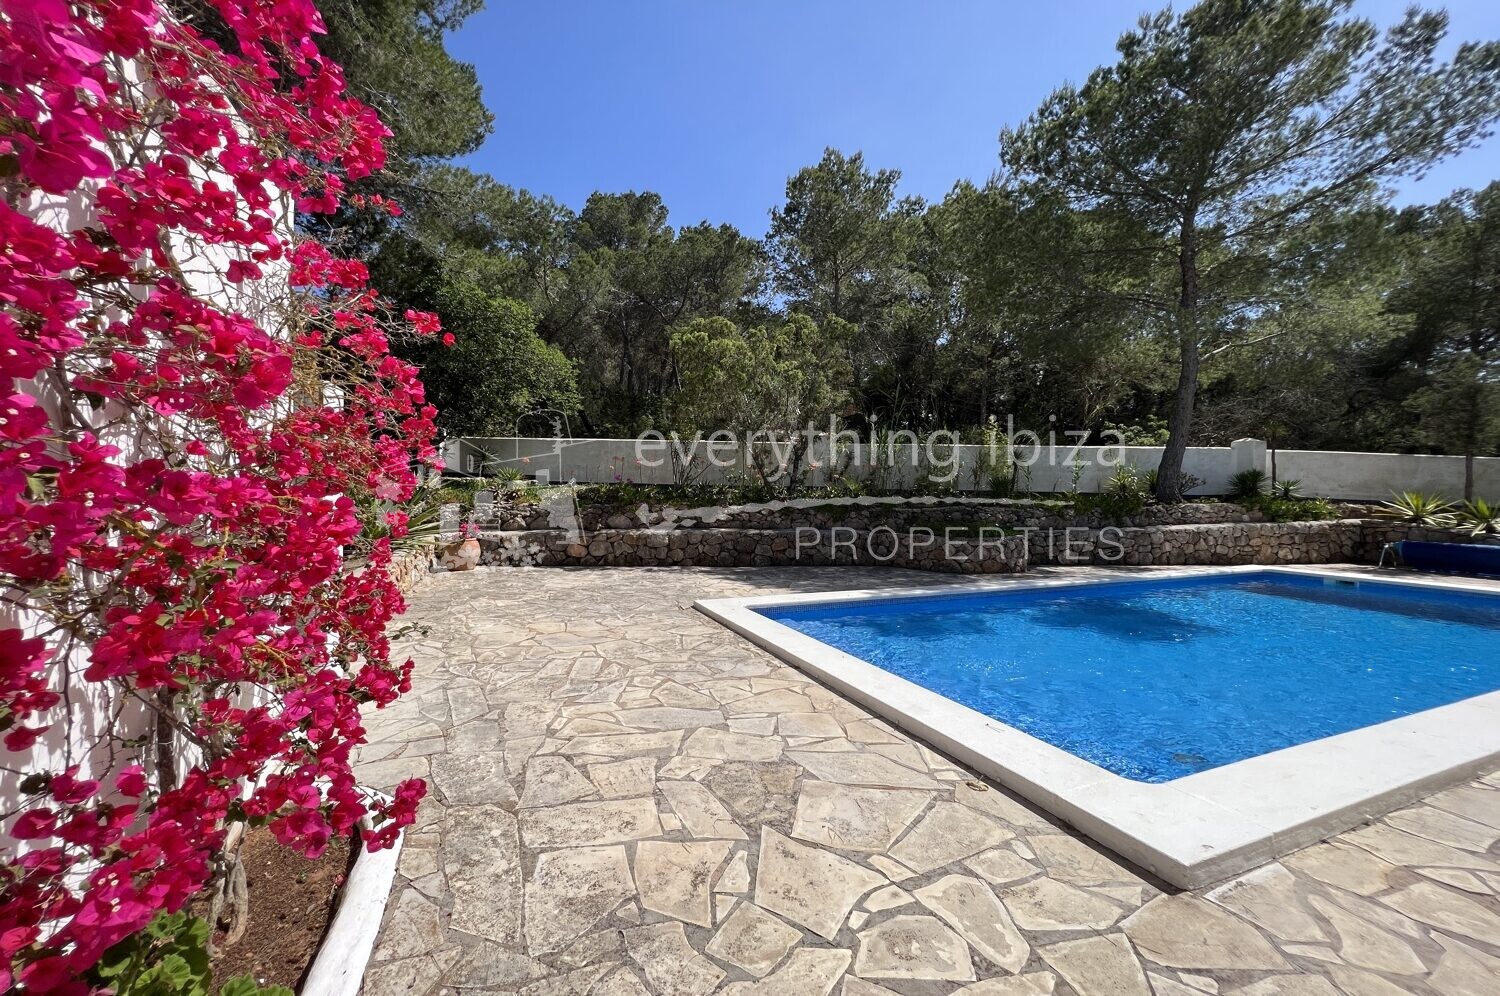 Peaceful & Private Detached Villa with Pool & Gardens, ref. 1454, for sale in Ibiza by everything ibiza Properties